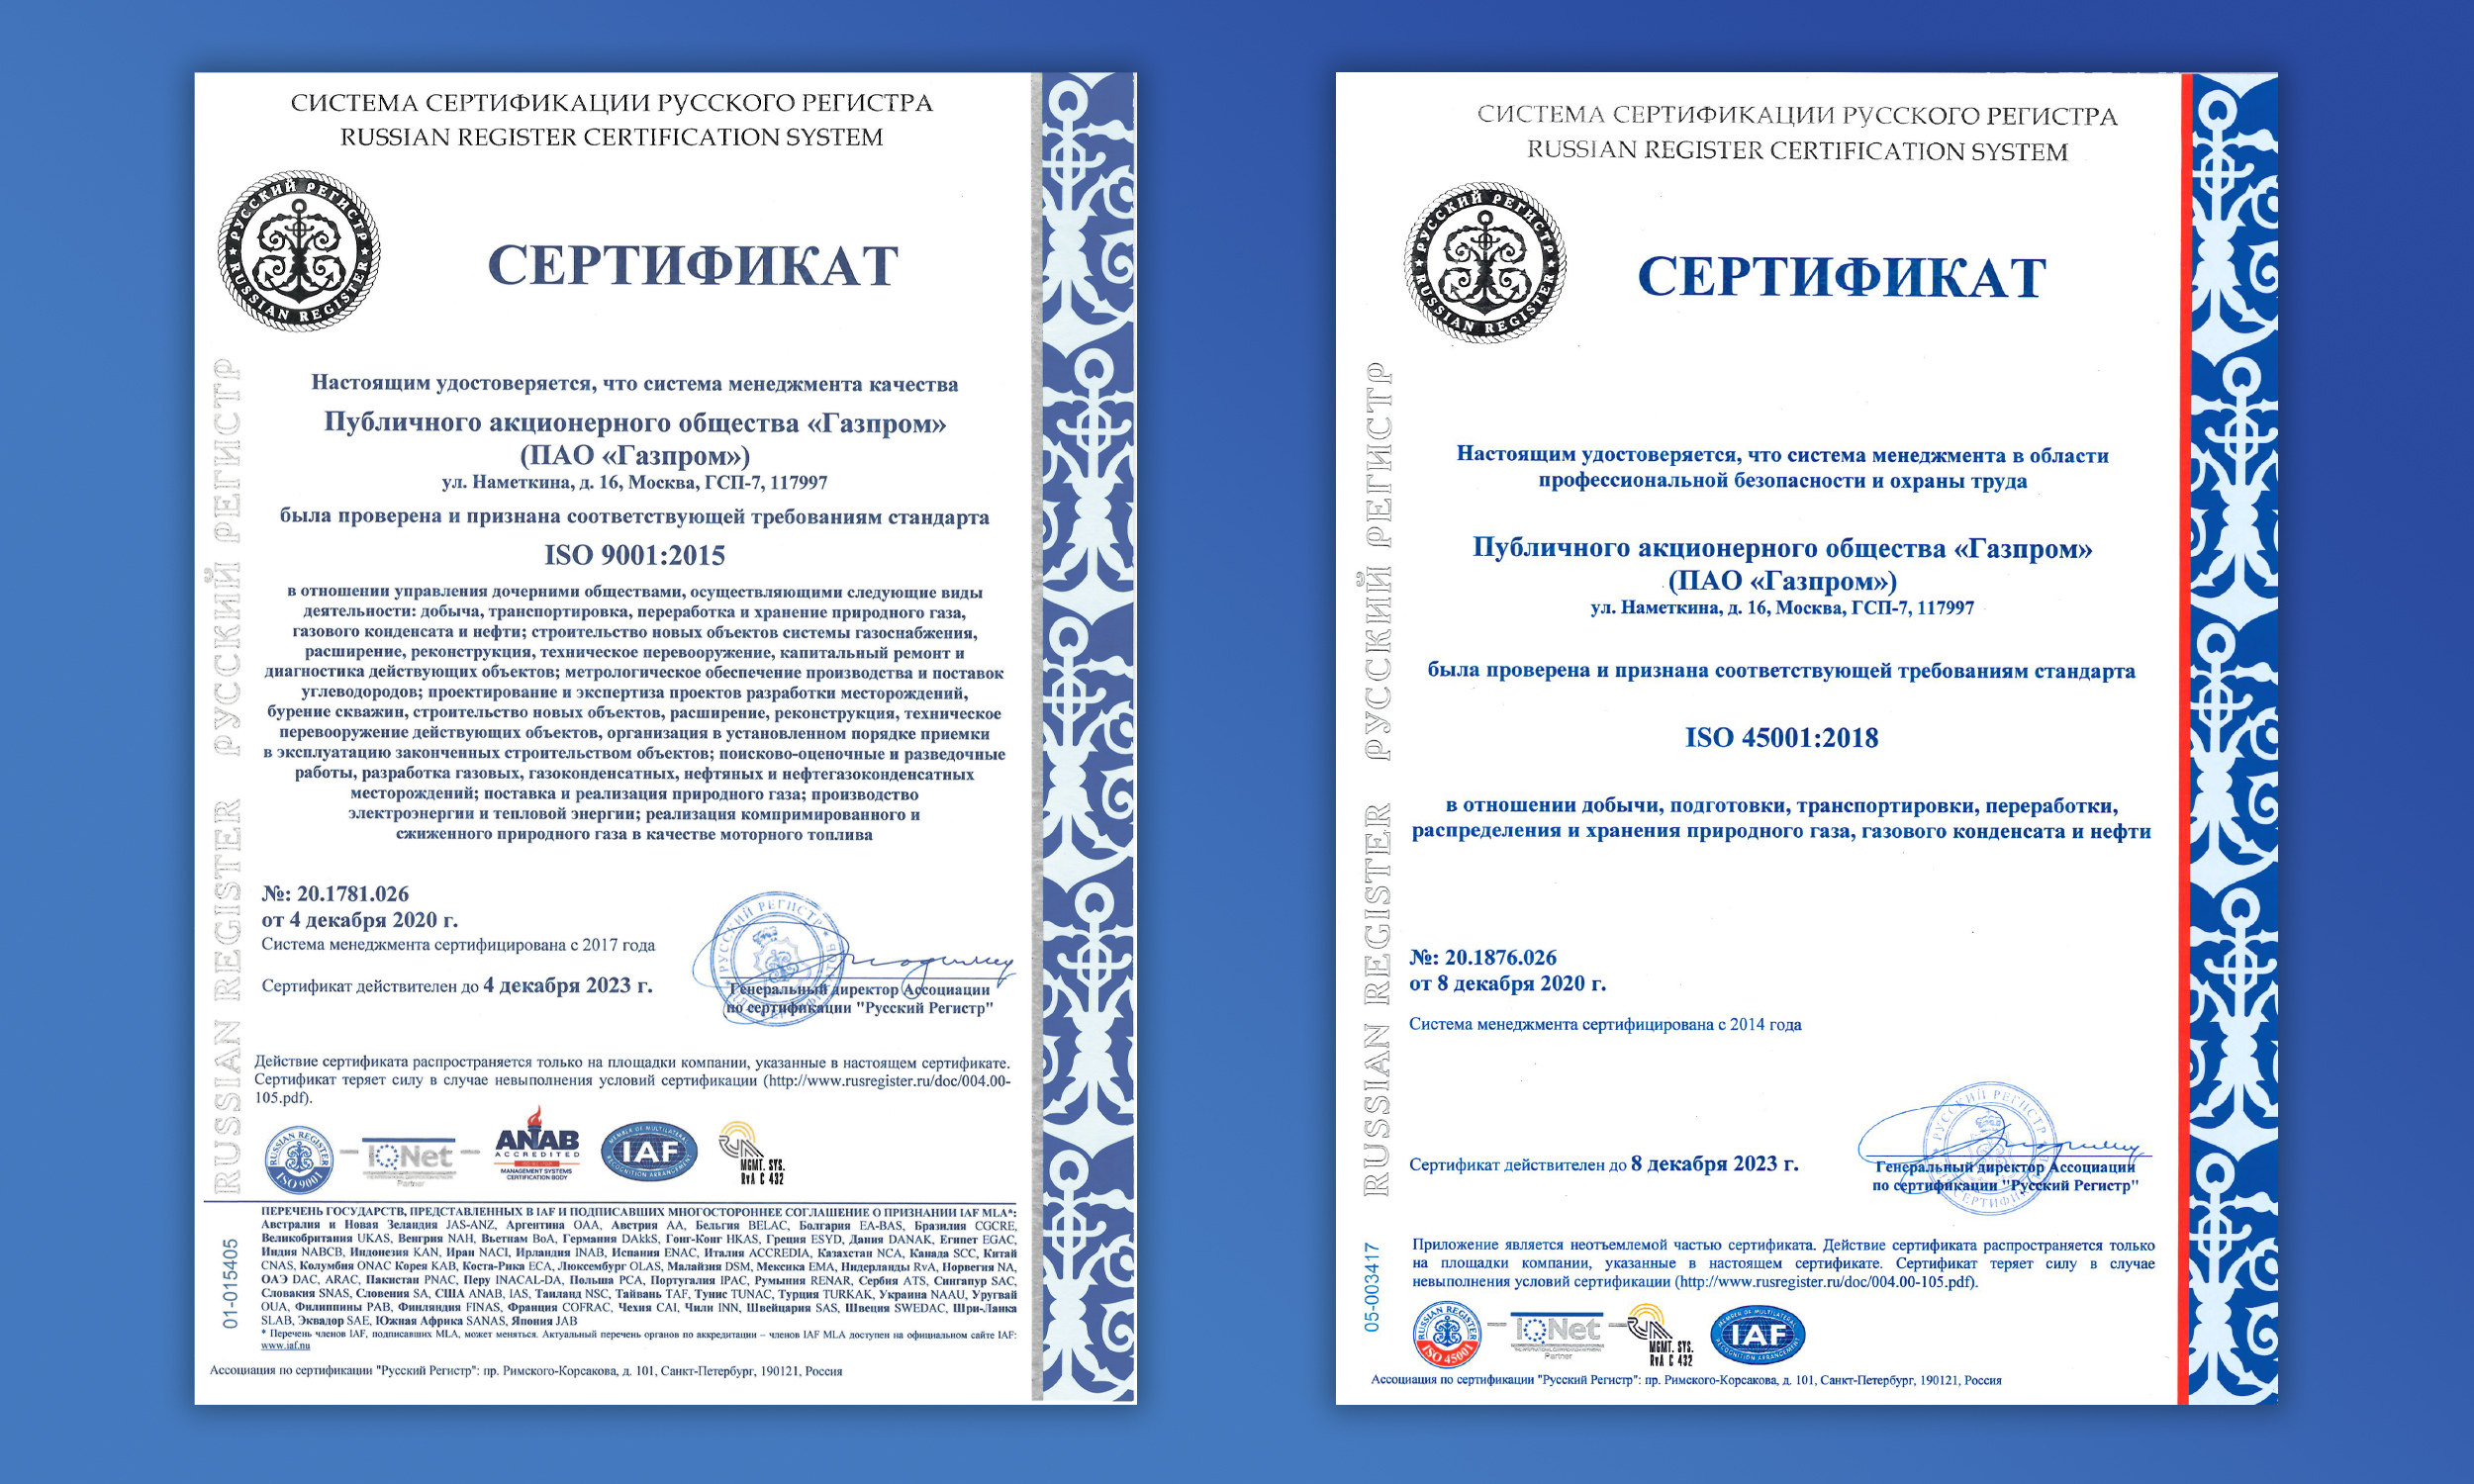 Gazprom confirms compliance of its quality management and process safety management systems with international standards